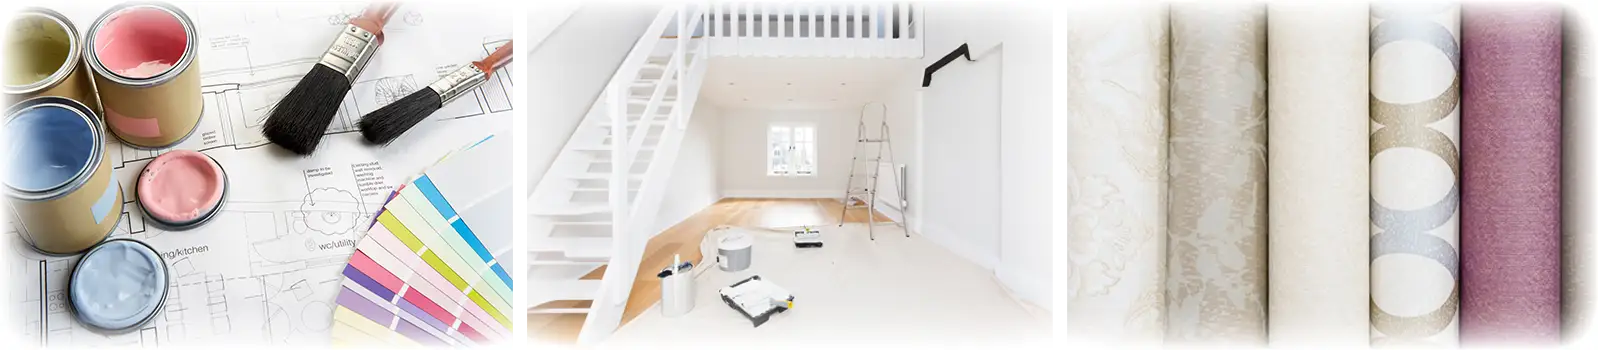 interior painting and decorating services in stoke-on-trent